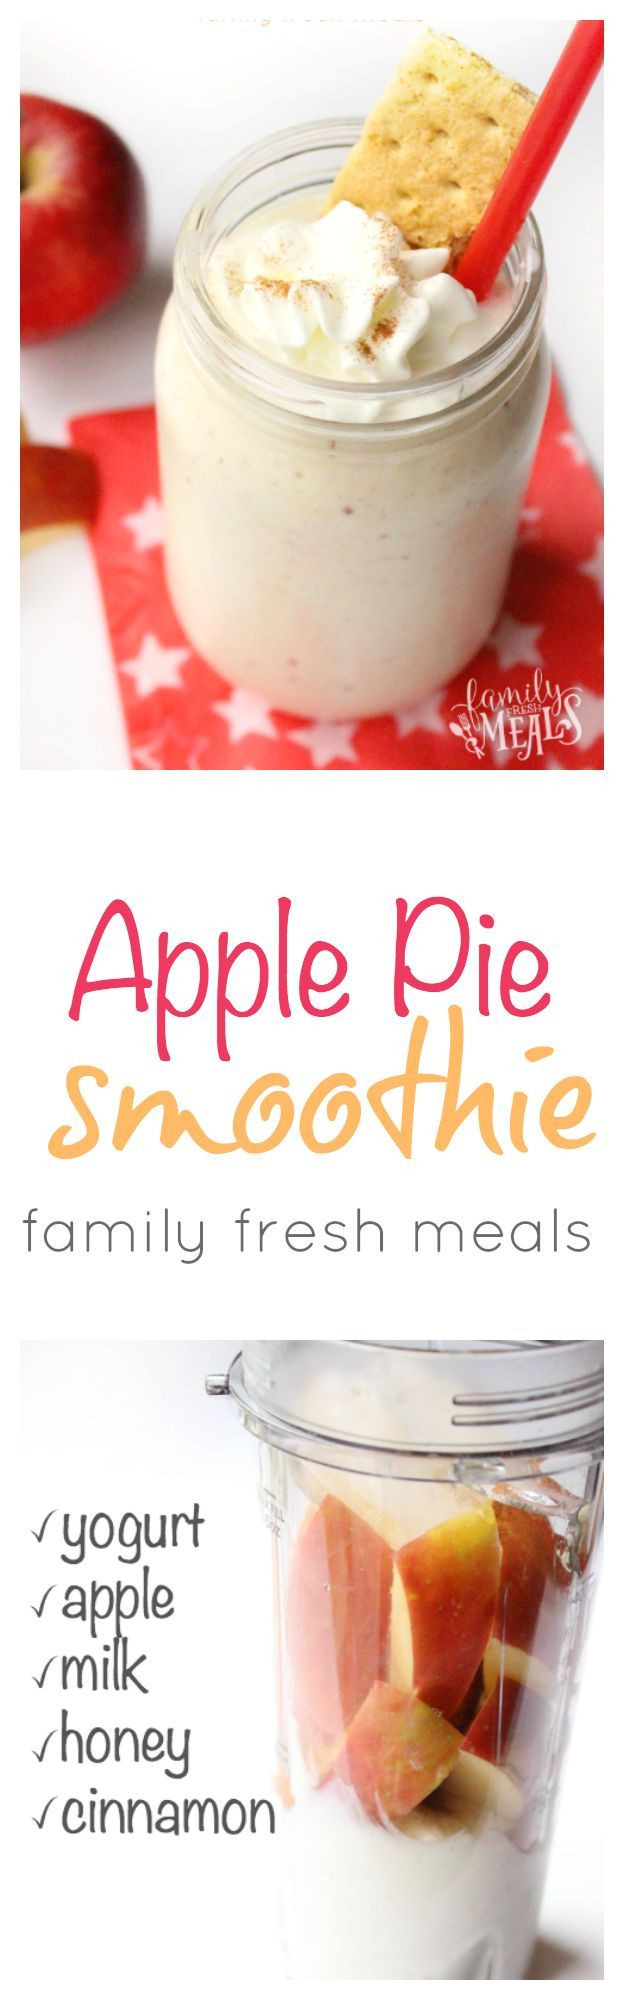 Apple Smoothie Recipes For Weight Loss
 Healthy Apple Pie Smoothie A great breakfast or snack